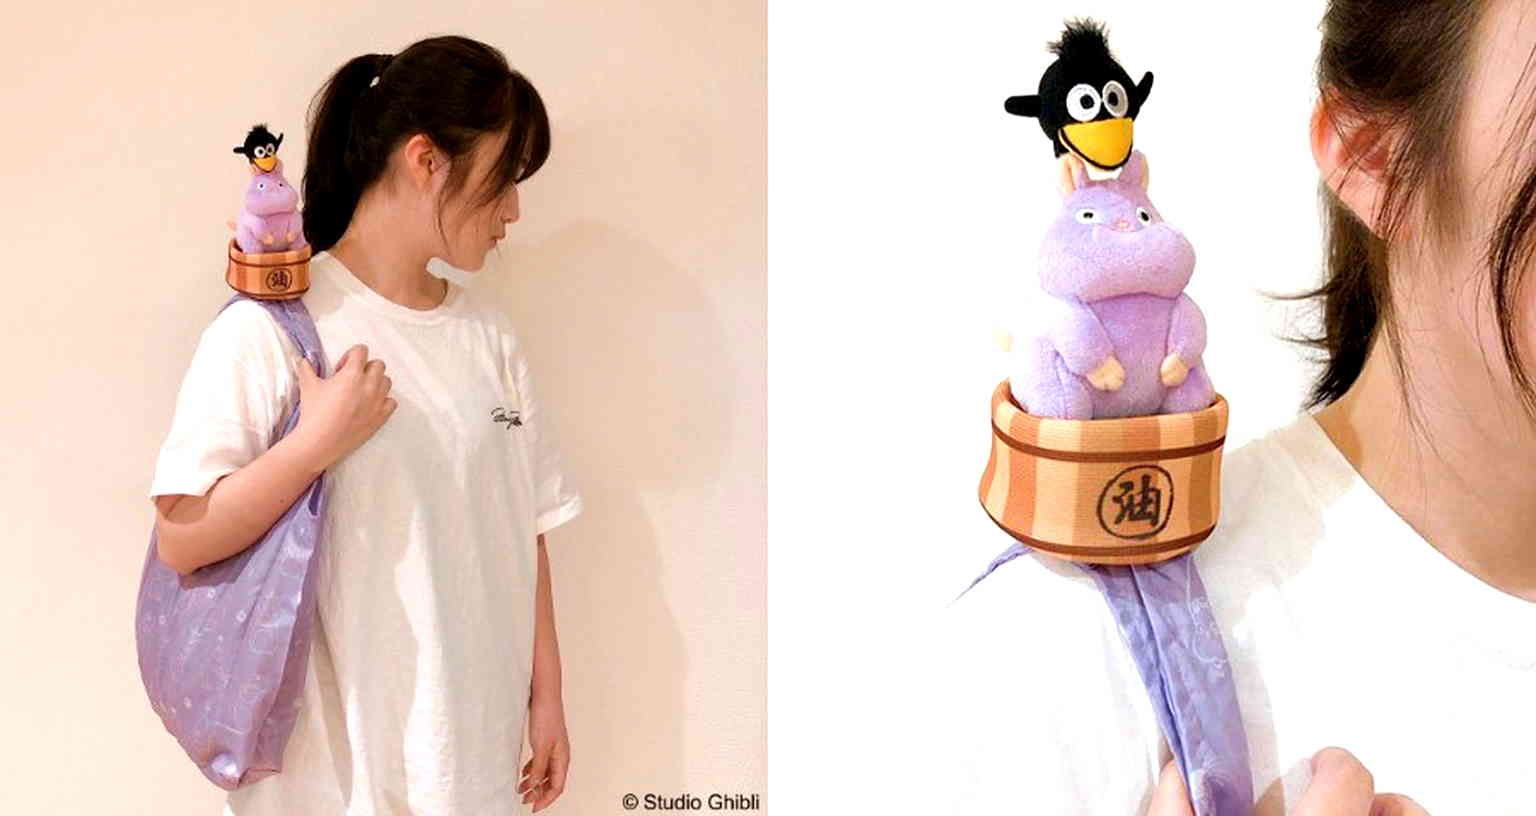 Carrying Your Own Studio Ghibli Character on Your Shoulder Can Now Be Good for the Environment